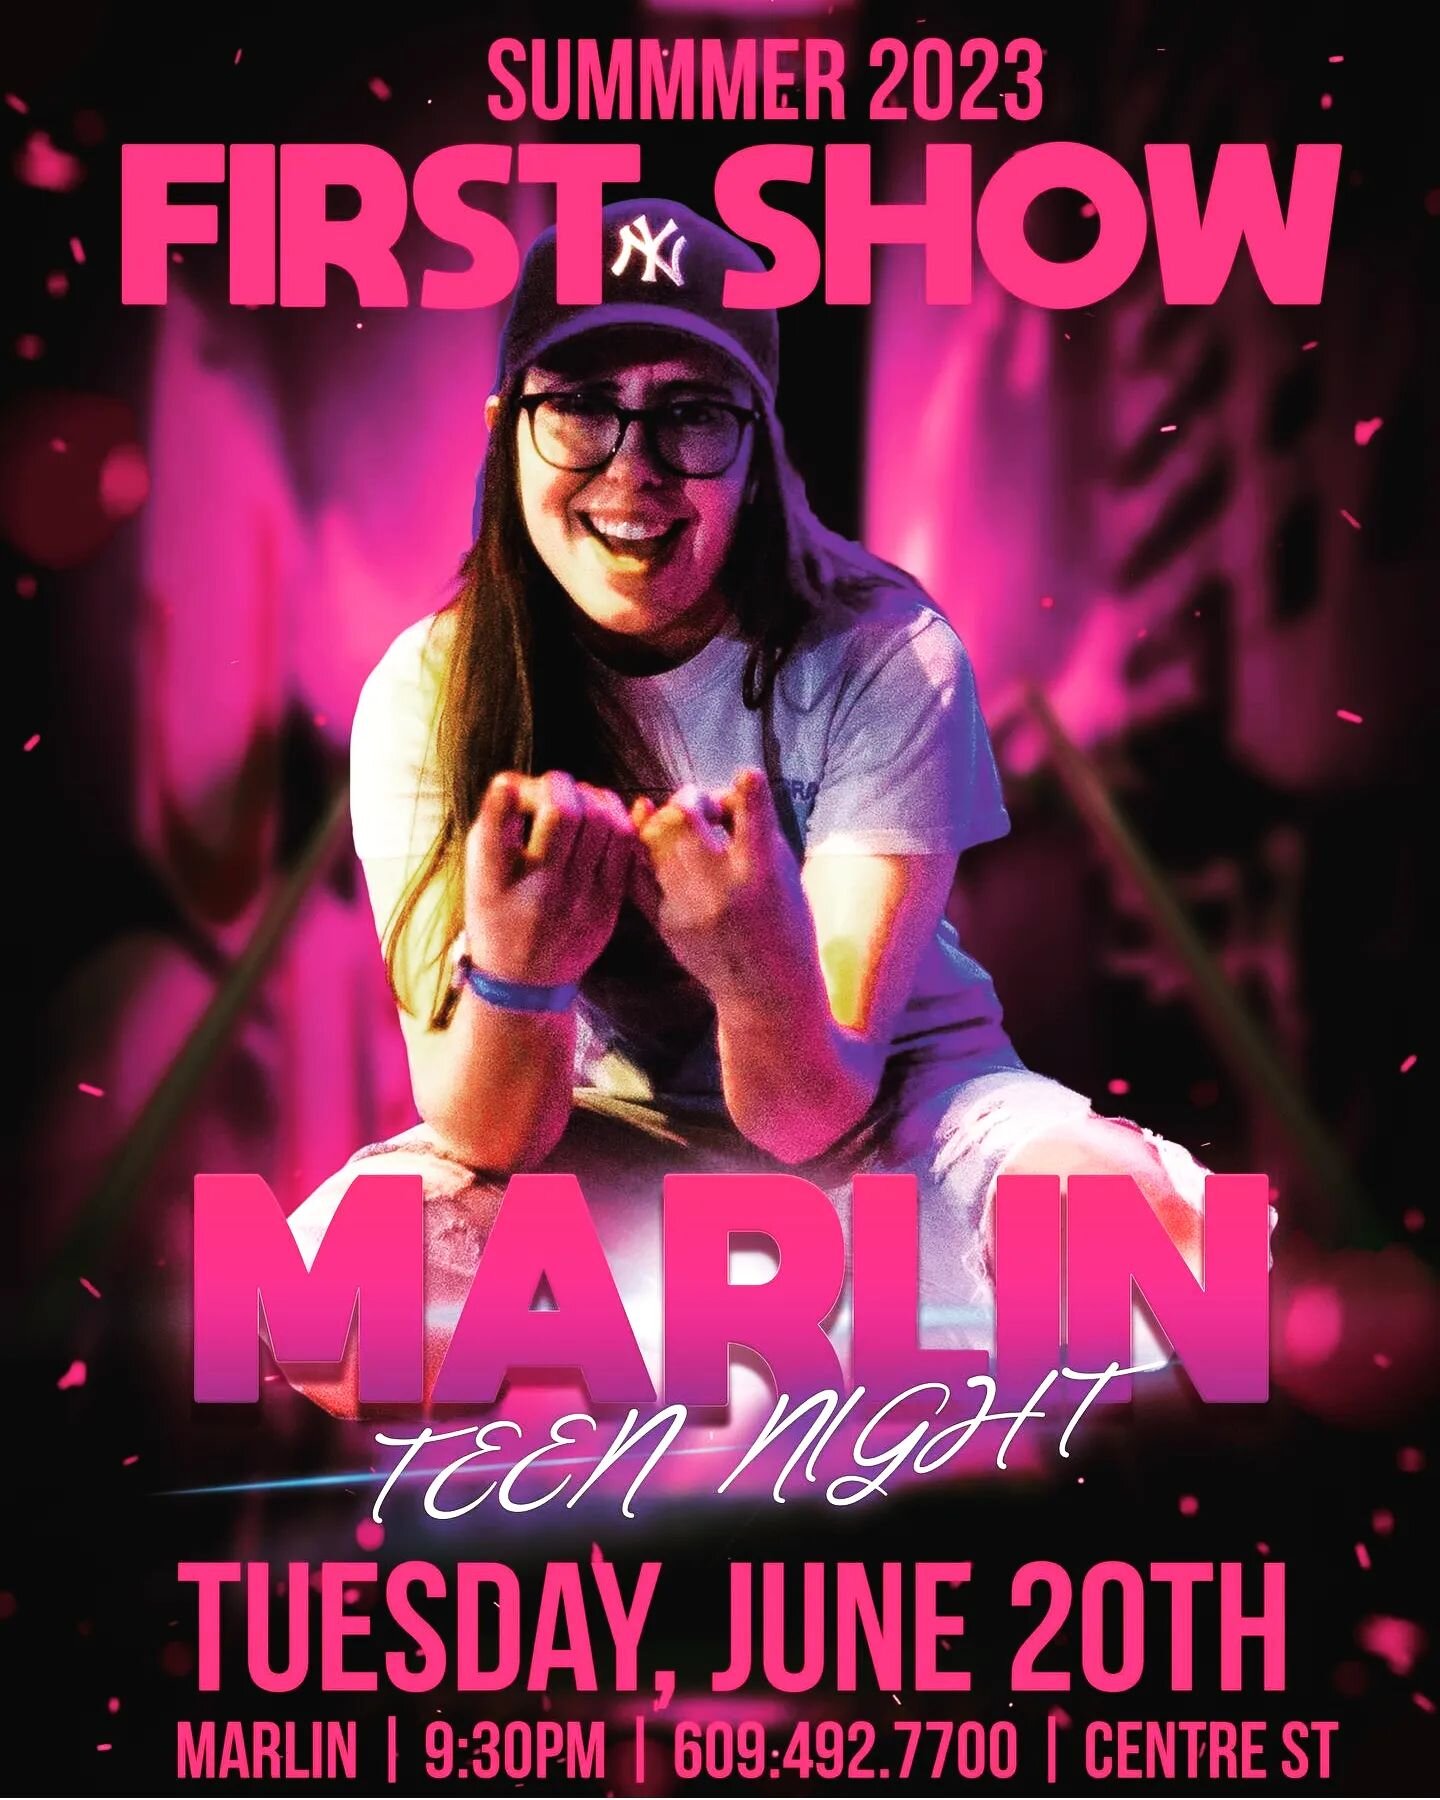 The Wait is Over! 

Tuesday, June 20th the first @marlinteennight of the summer

Our girl @erinconstantine is back at the beach 🪩